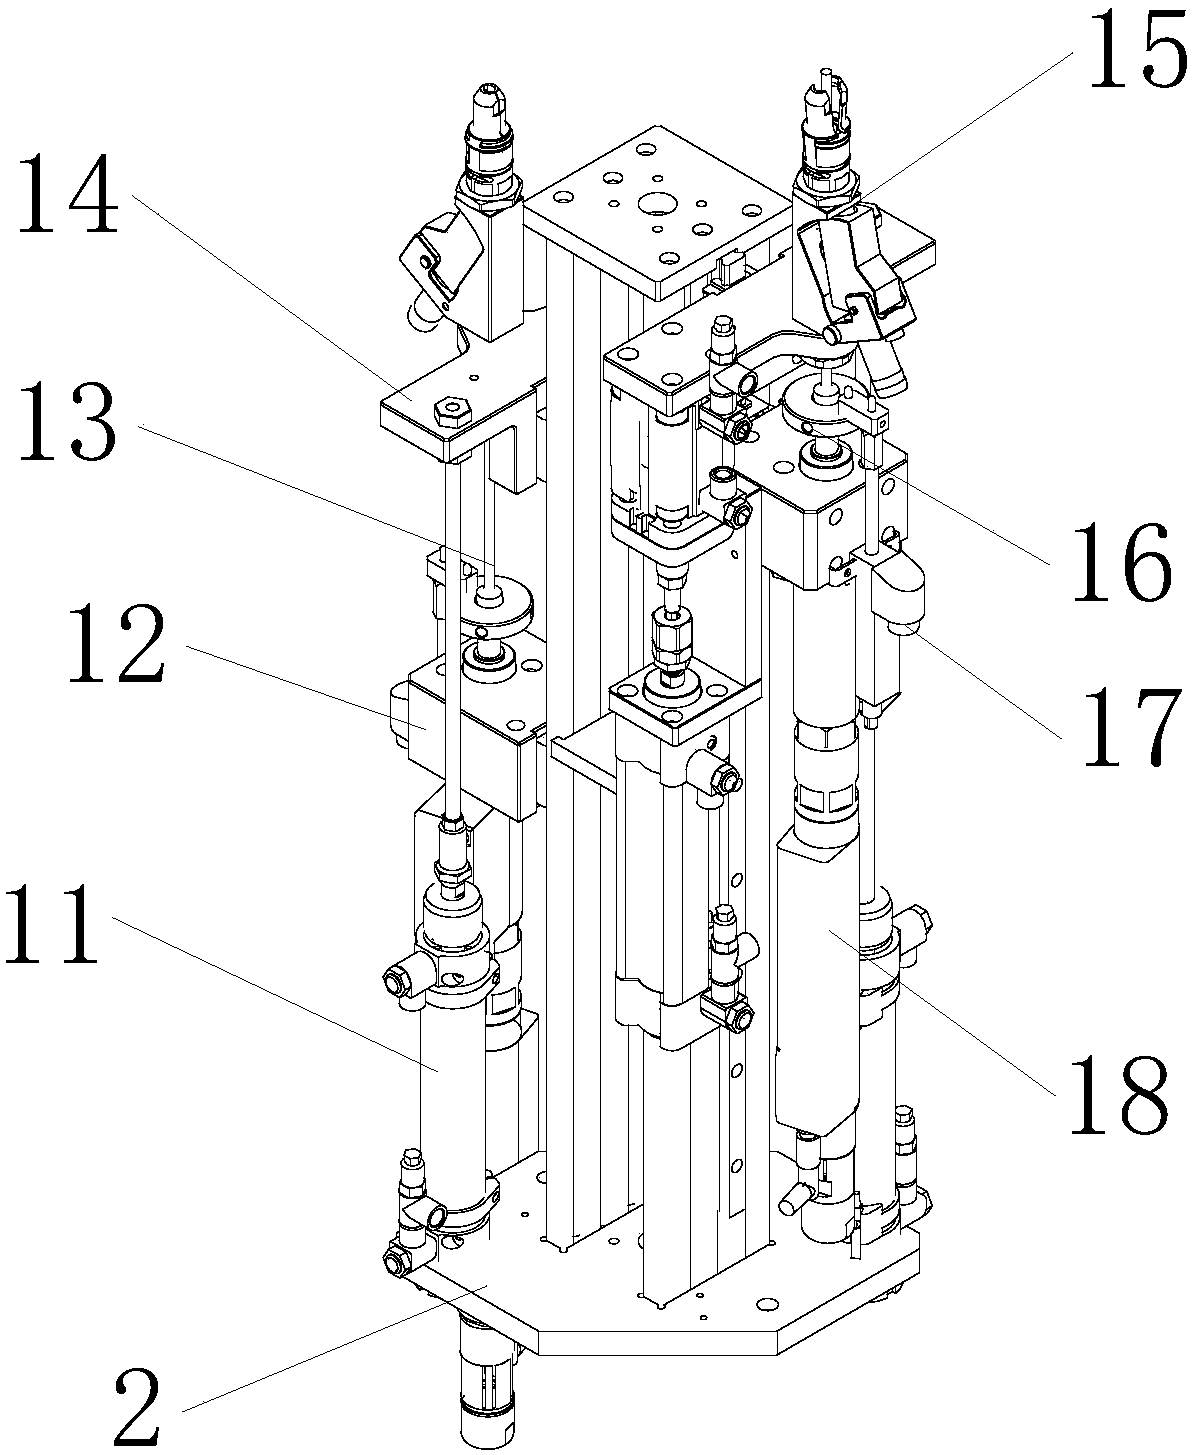 Device for reverse beating of screw and process